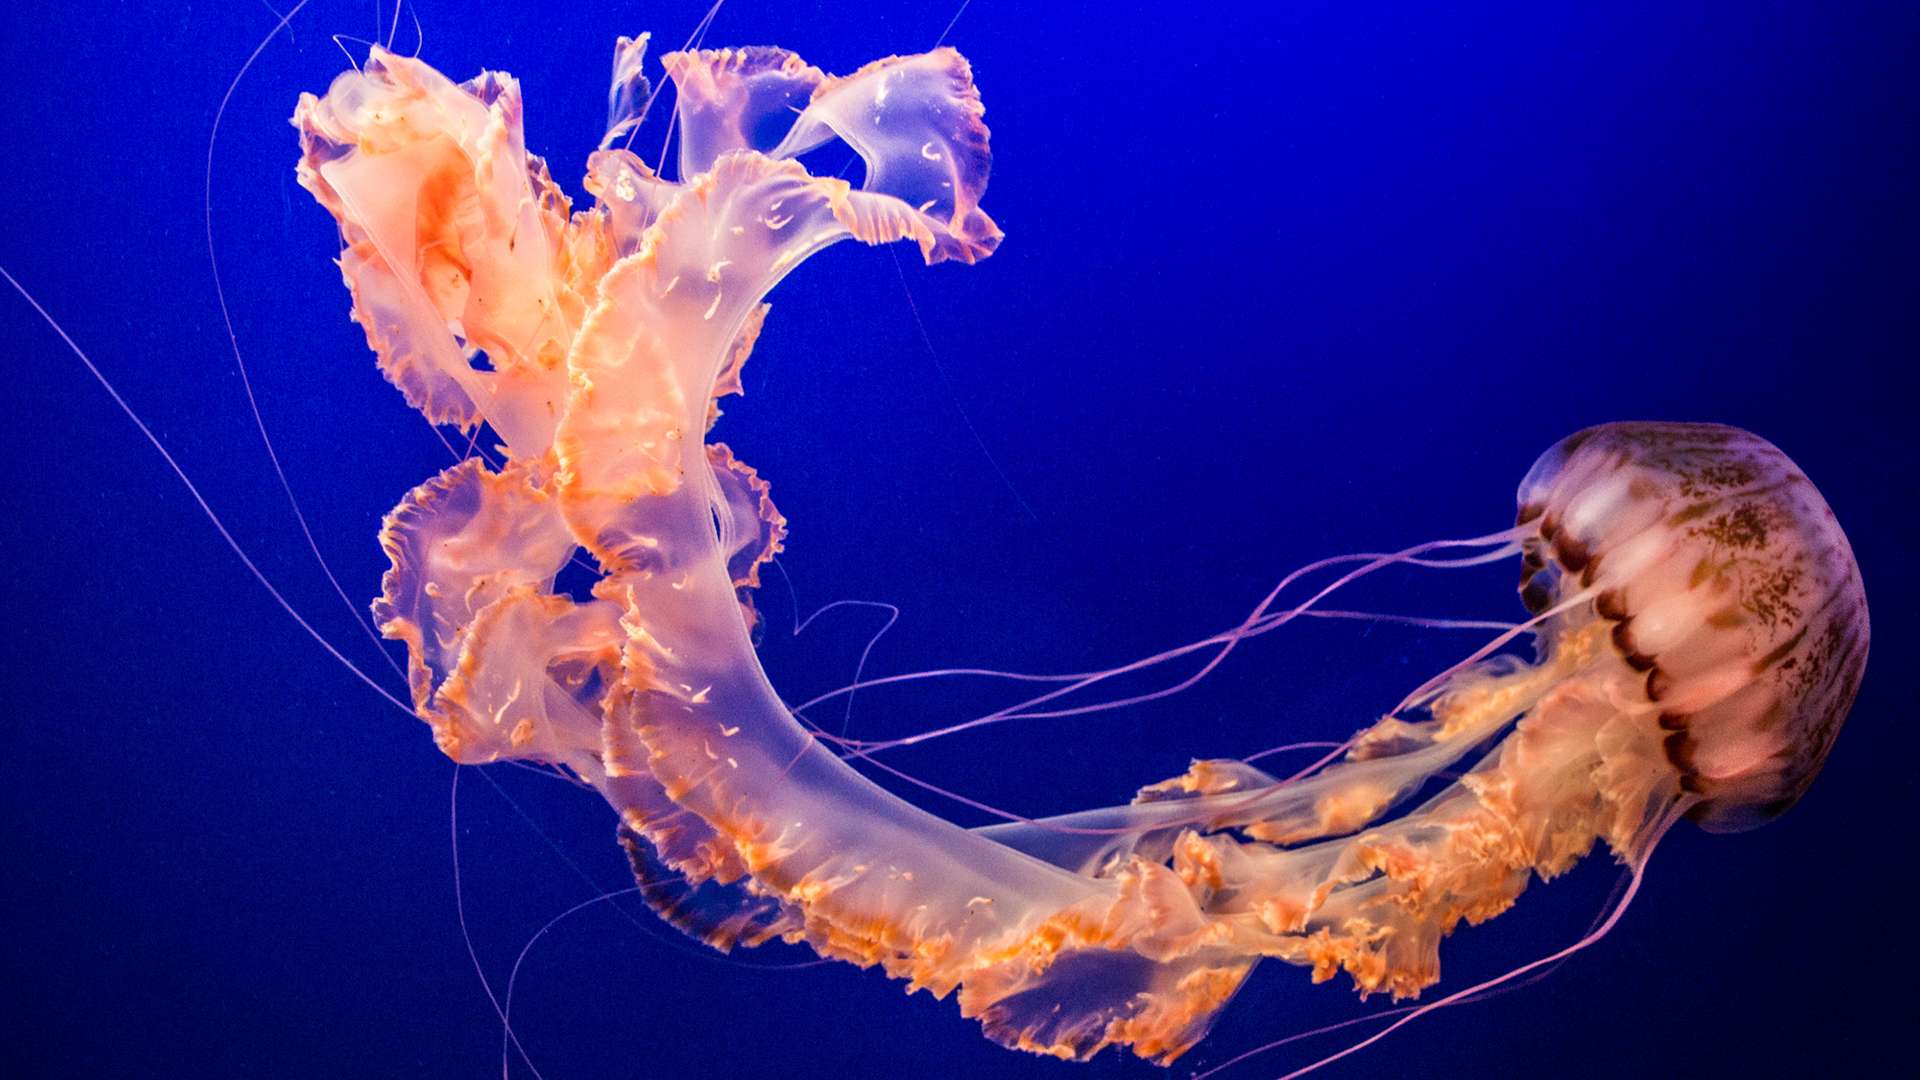 How Are Jellyfish Affected By Oil Spills